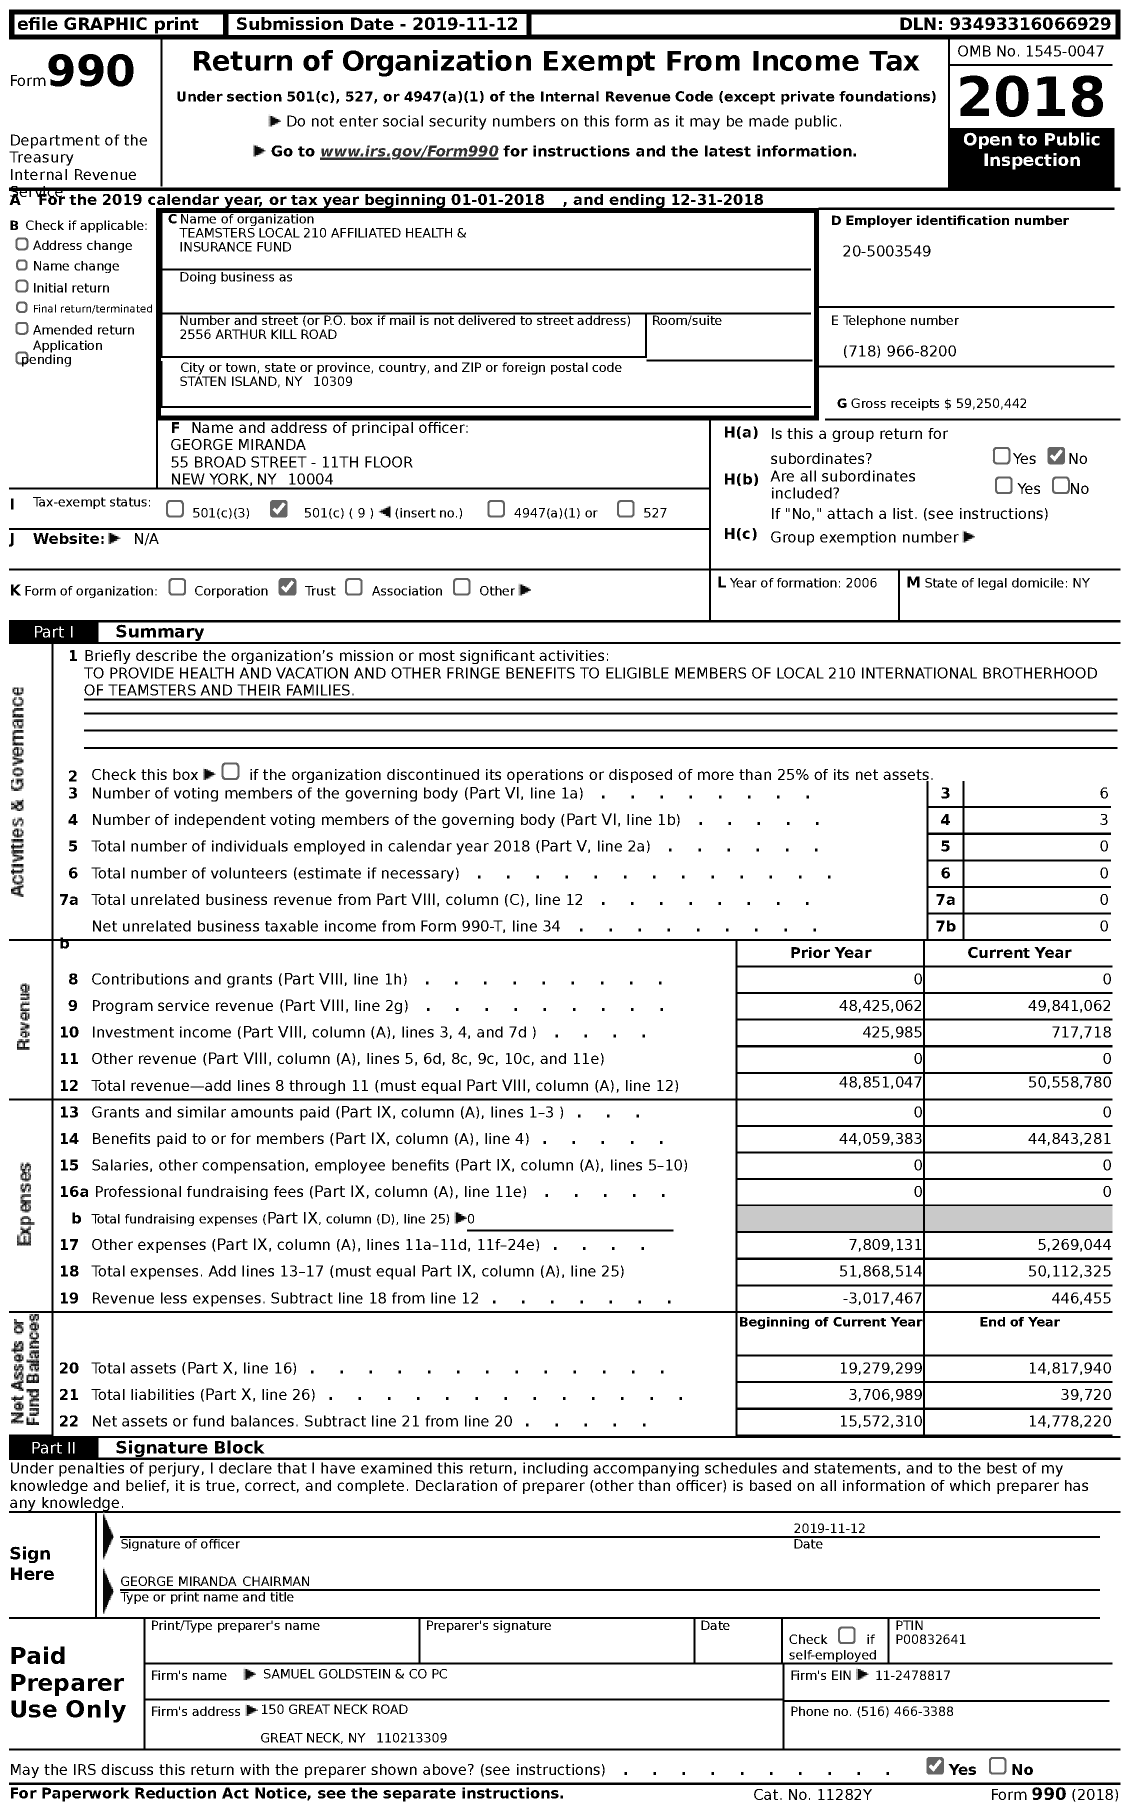 Image of first page of 2018 Form 990 for Teamsters Local 210 Affiliated Health and Insurance Fund